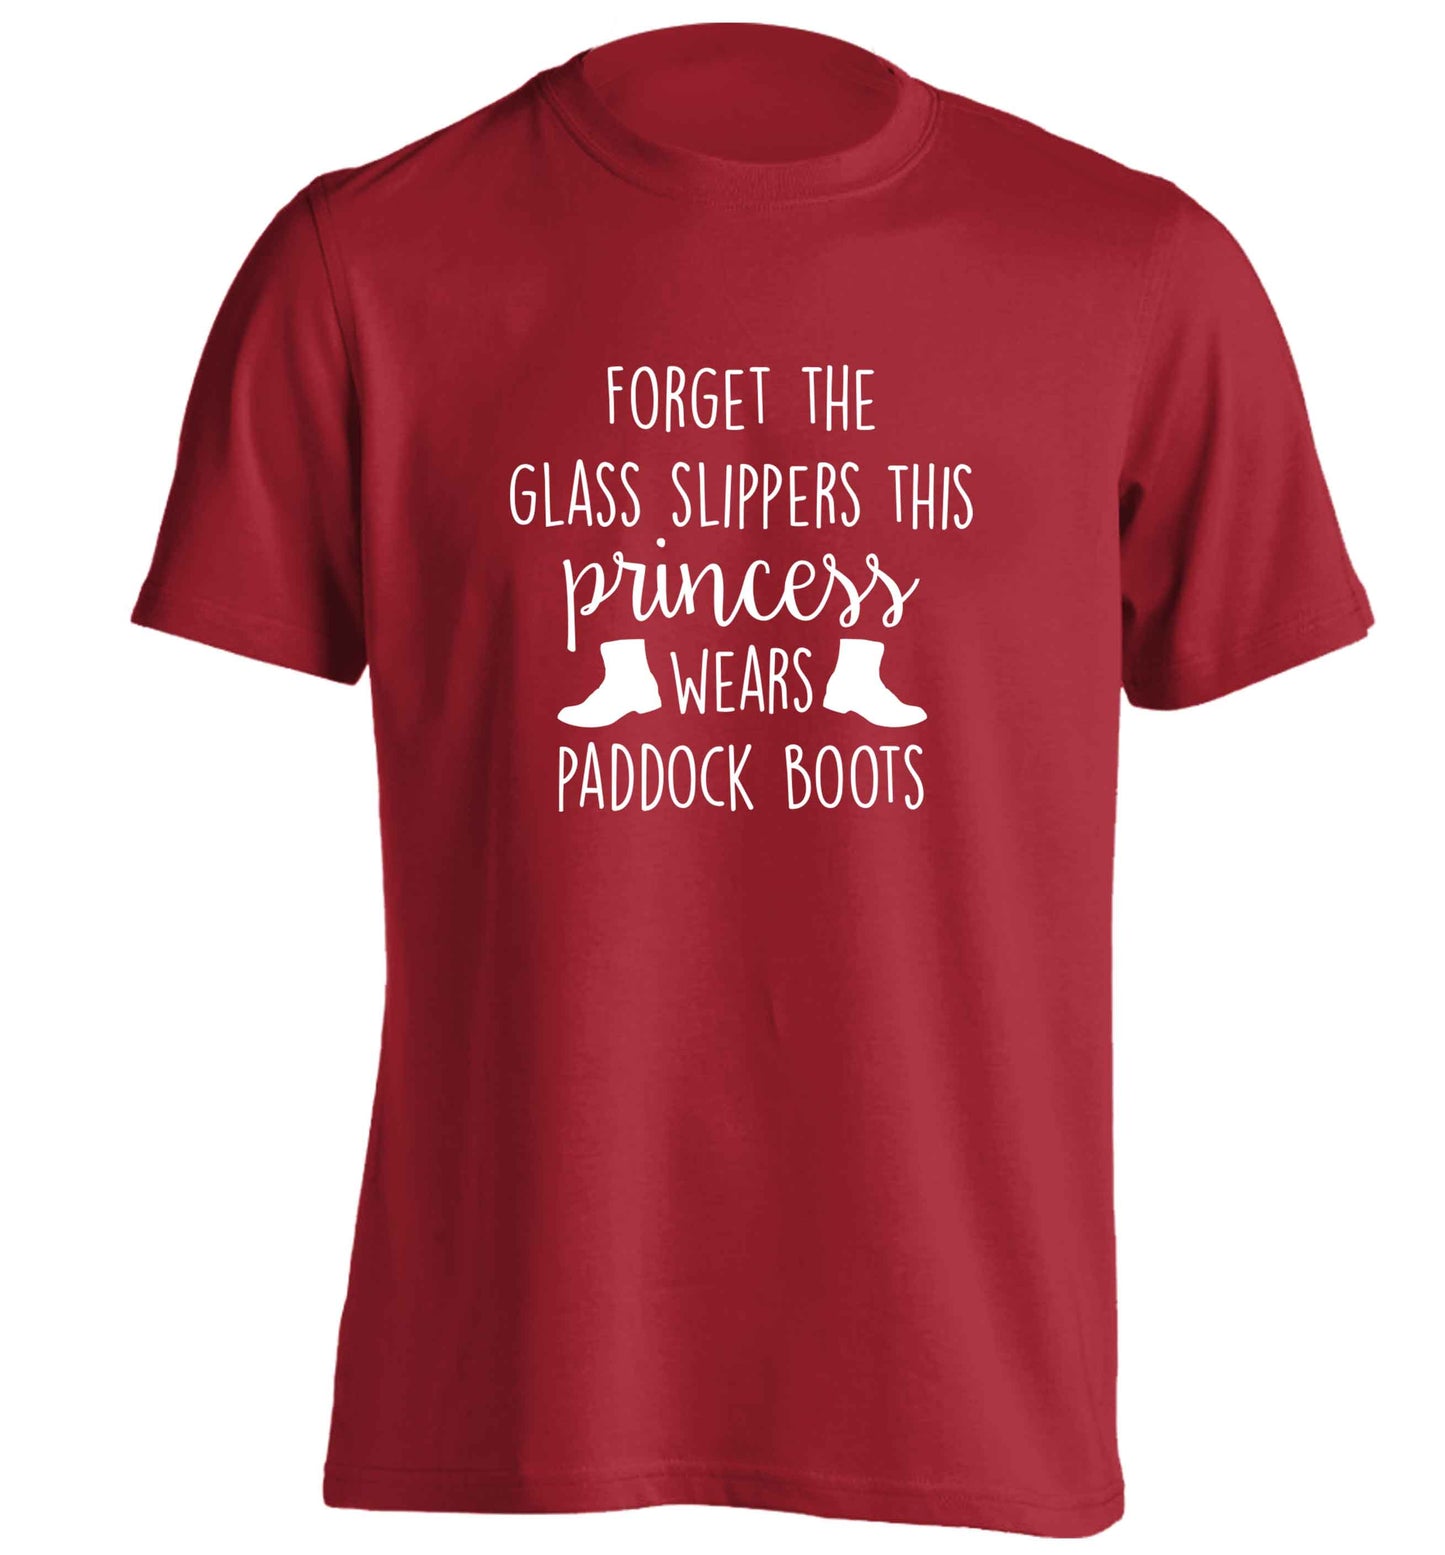 Forget the glass slippers this princess wears paddock boots adults unisex red Tshirt 2XL